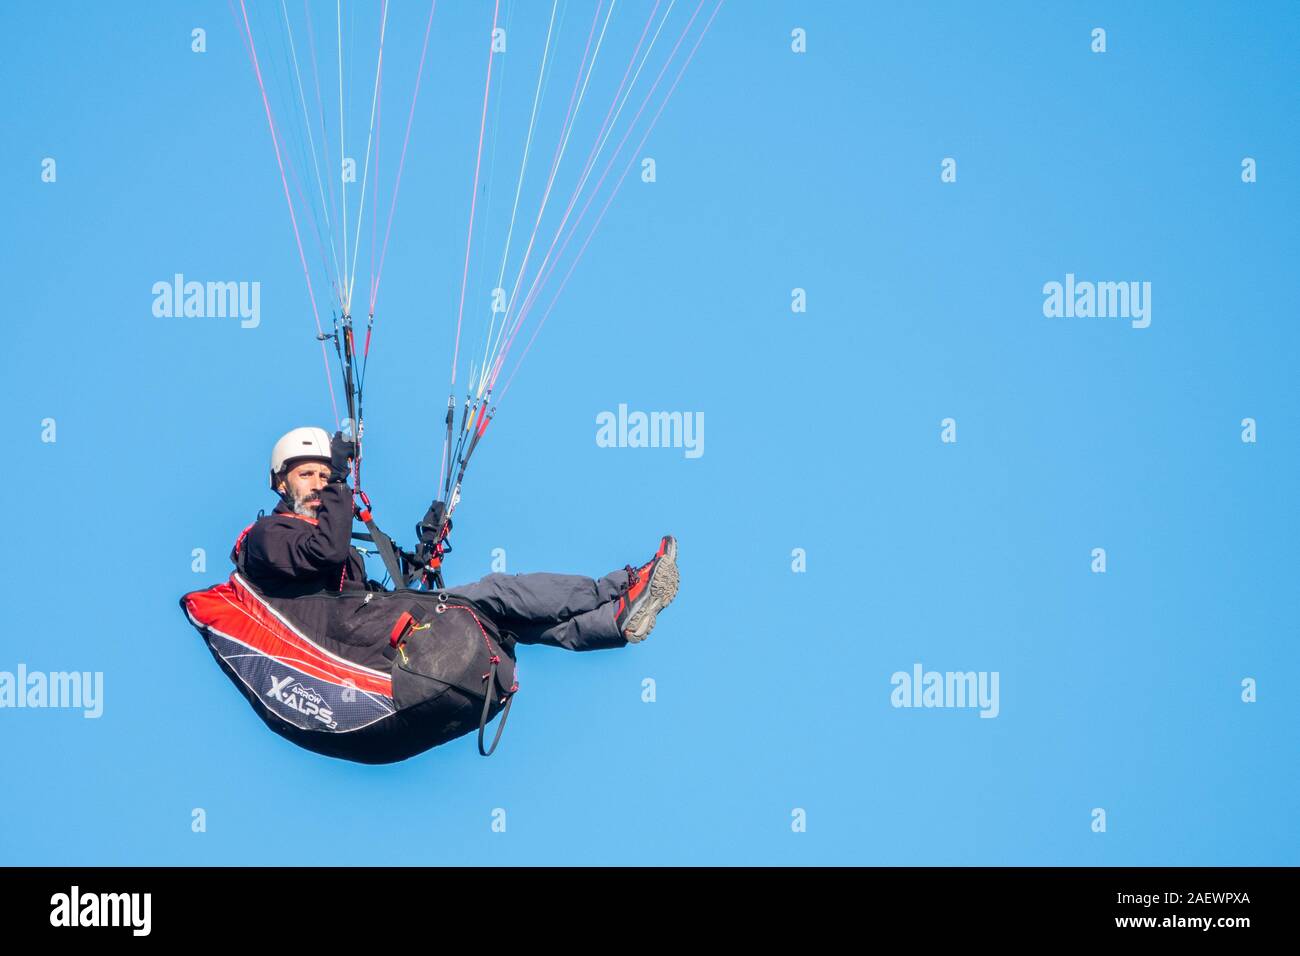 Bearded man seated in a paragliding rig in flight, full frame blue sky  background, looking at camera with copy space Stock Photo - Alamy